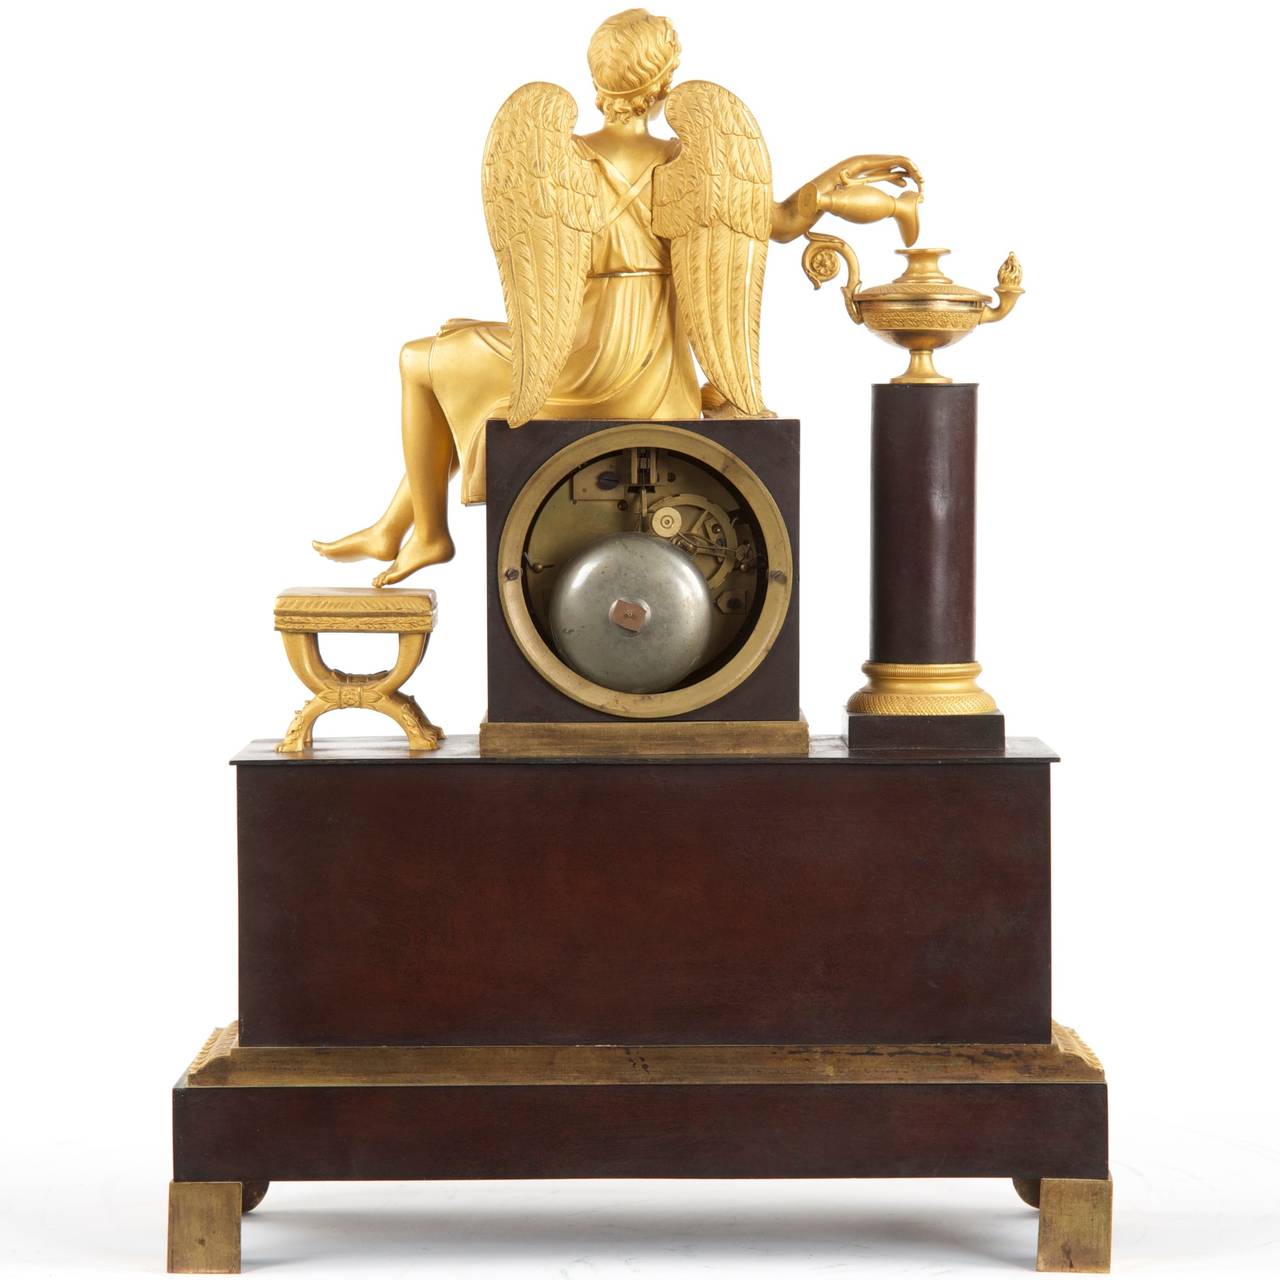 Cast 19th Century French Ormolu and Patinated Bronze Mantel Clock